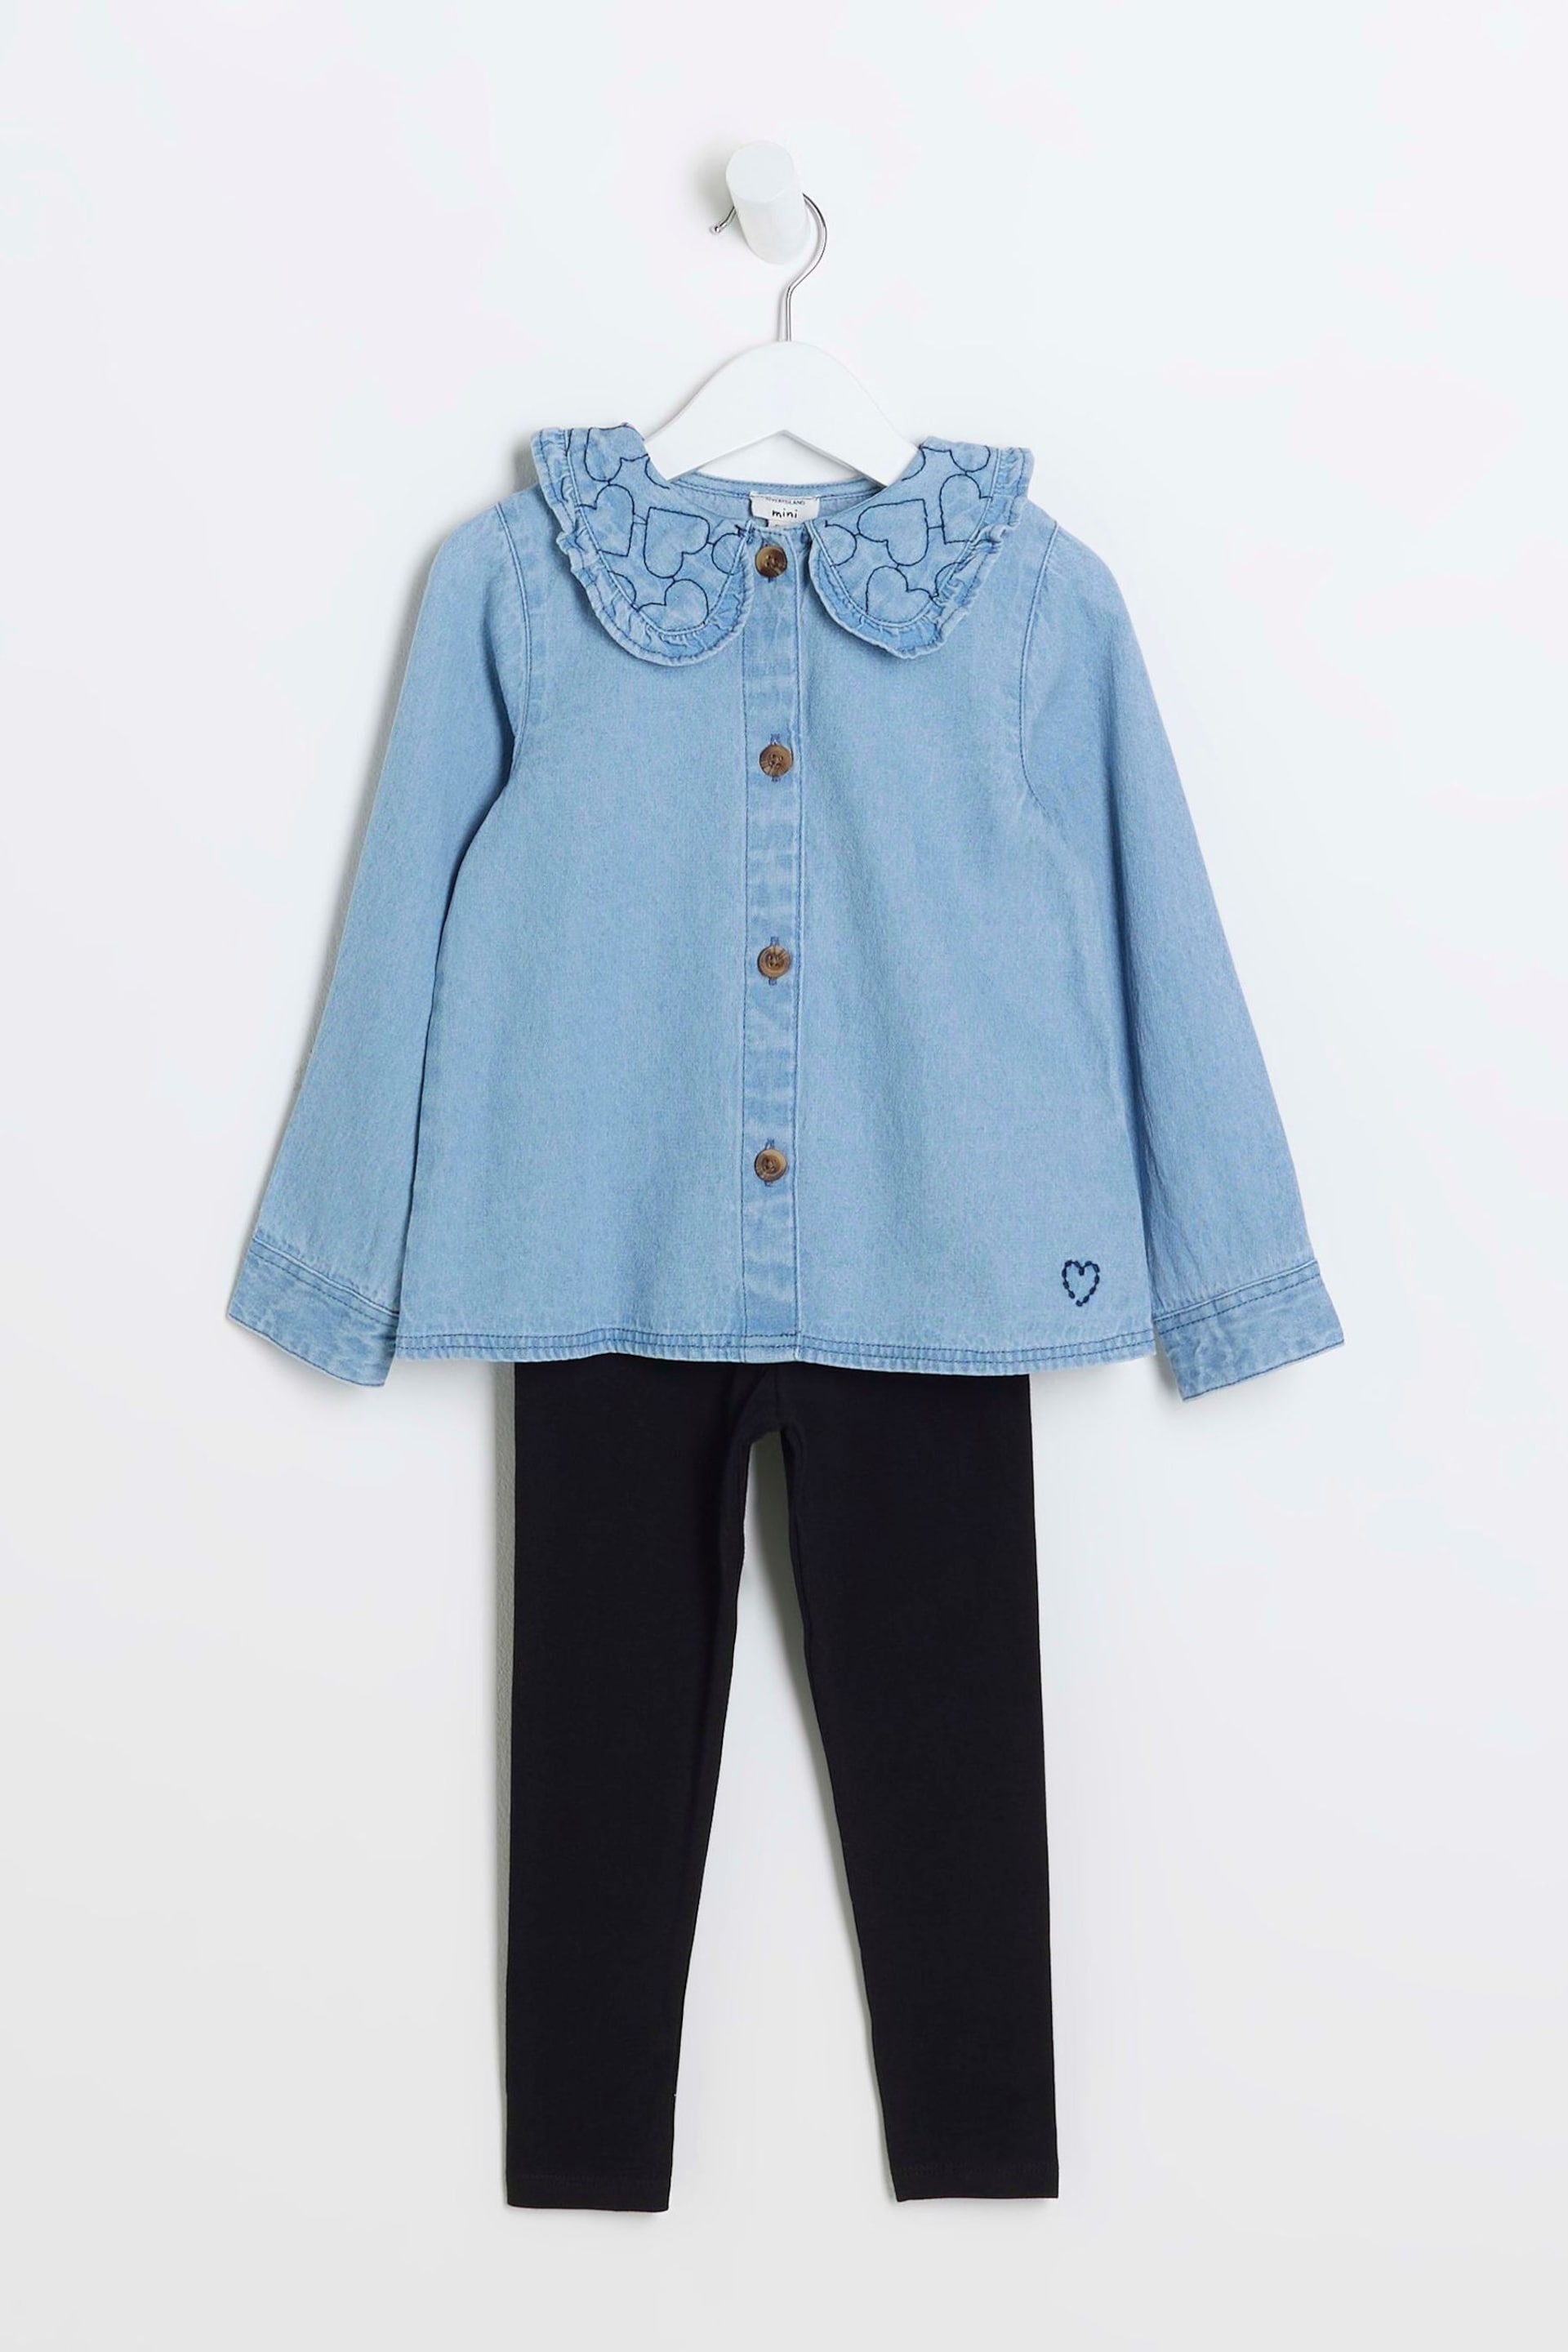 River Island Blue Girls Heart Quilted Blouse Set - Image 3 of 5